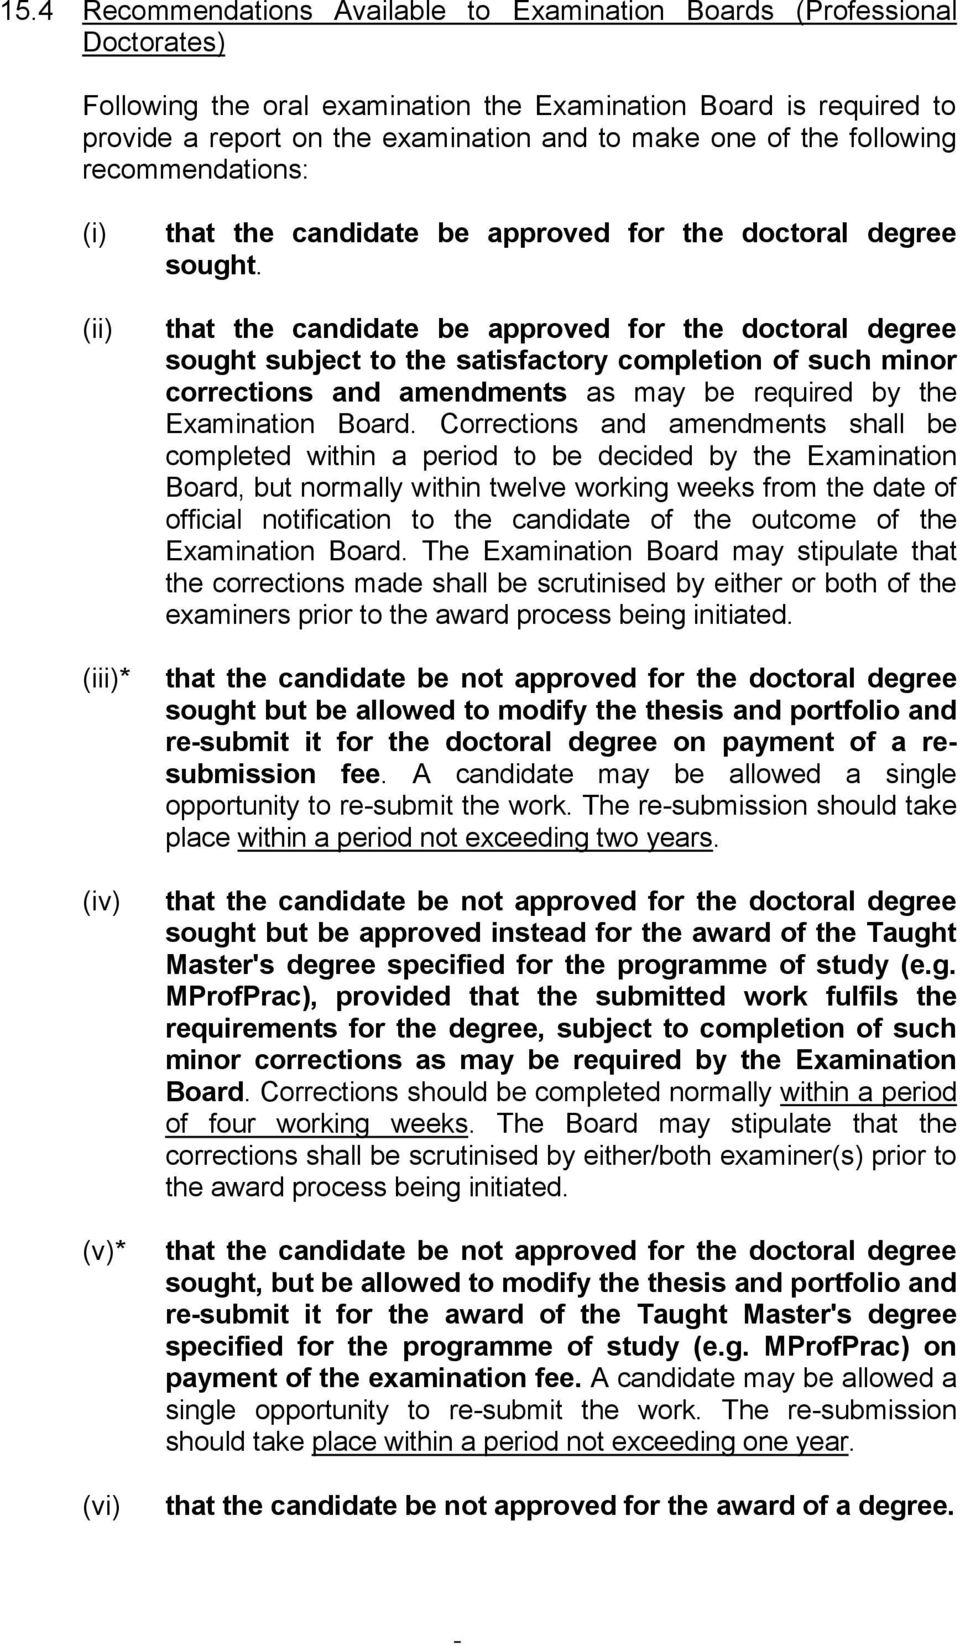 that the candidate be approved for the doctoral degree sought subject to the satisfactory completion of such minor corrections and amendments as may be required by the Examination Board.